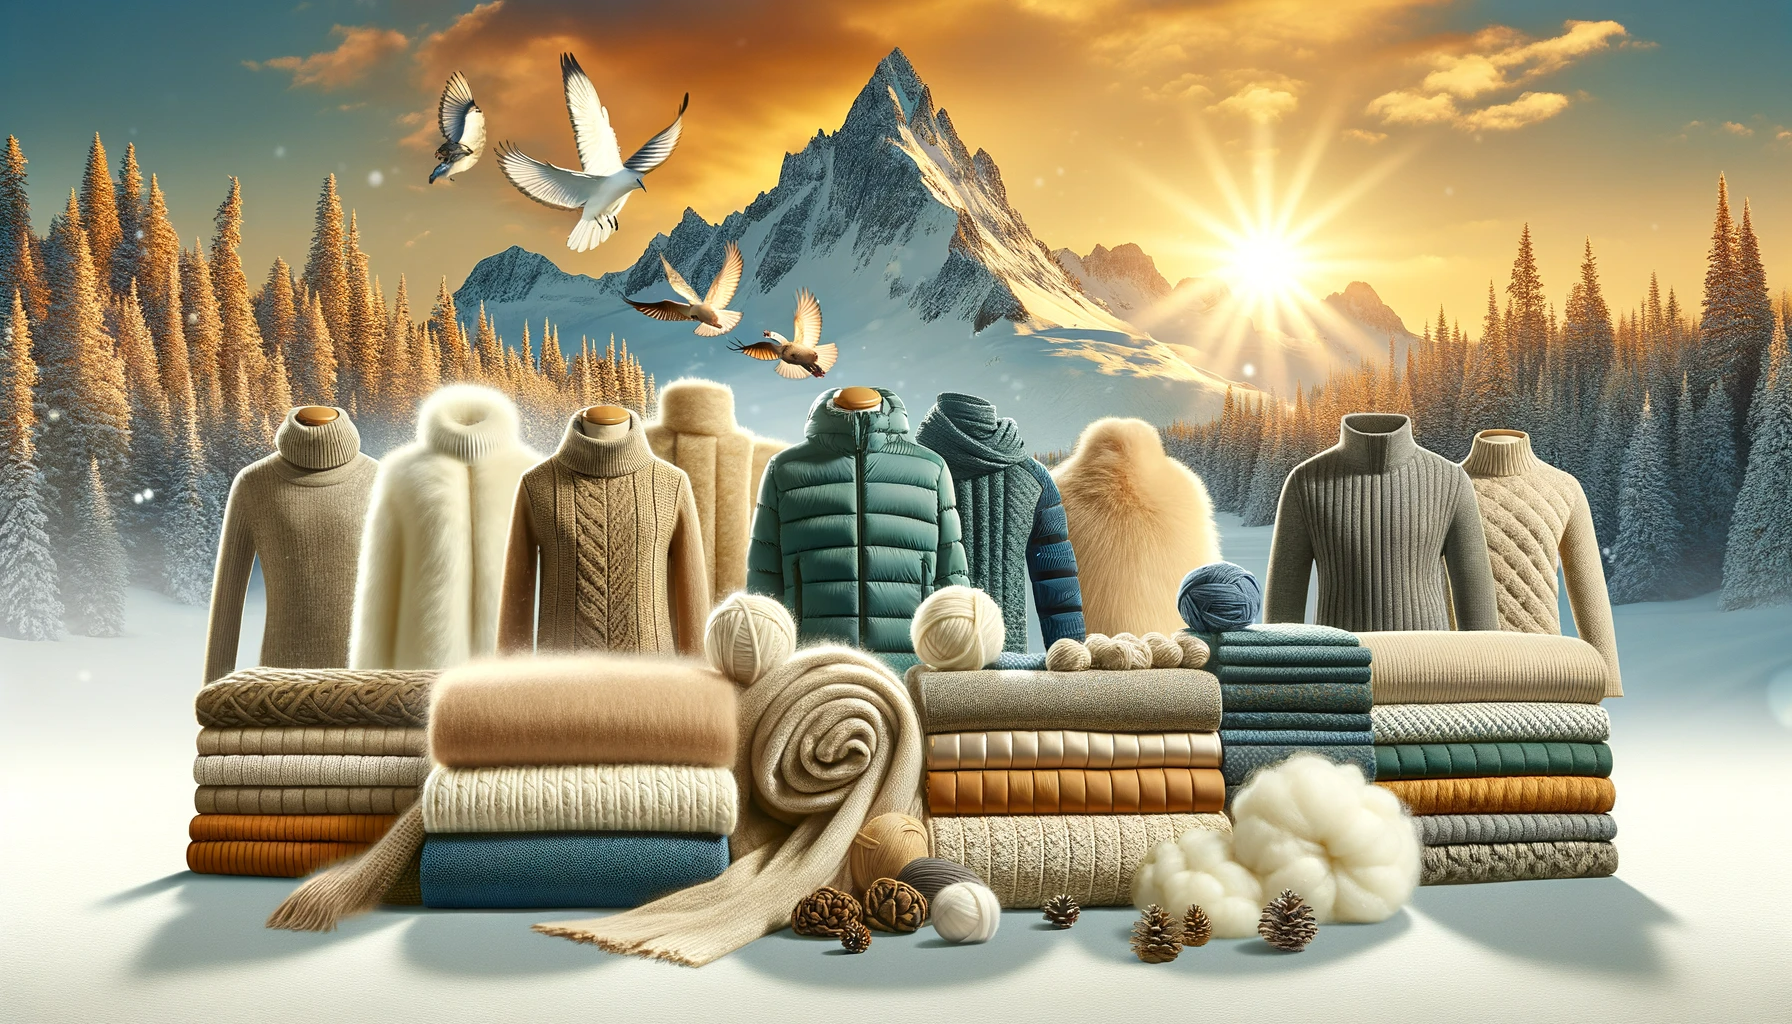 Winter Fabric Guide: The 10 Best Fabrics For Cold Weather - Fabricare Center